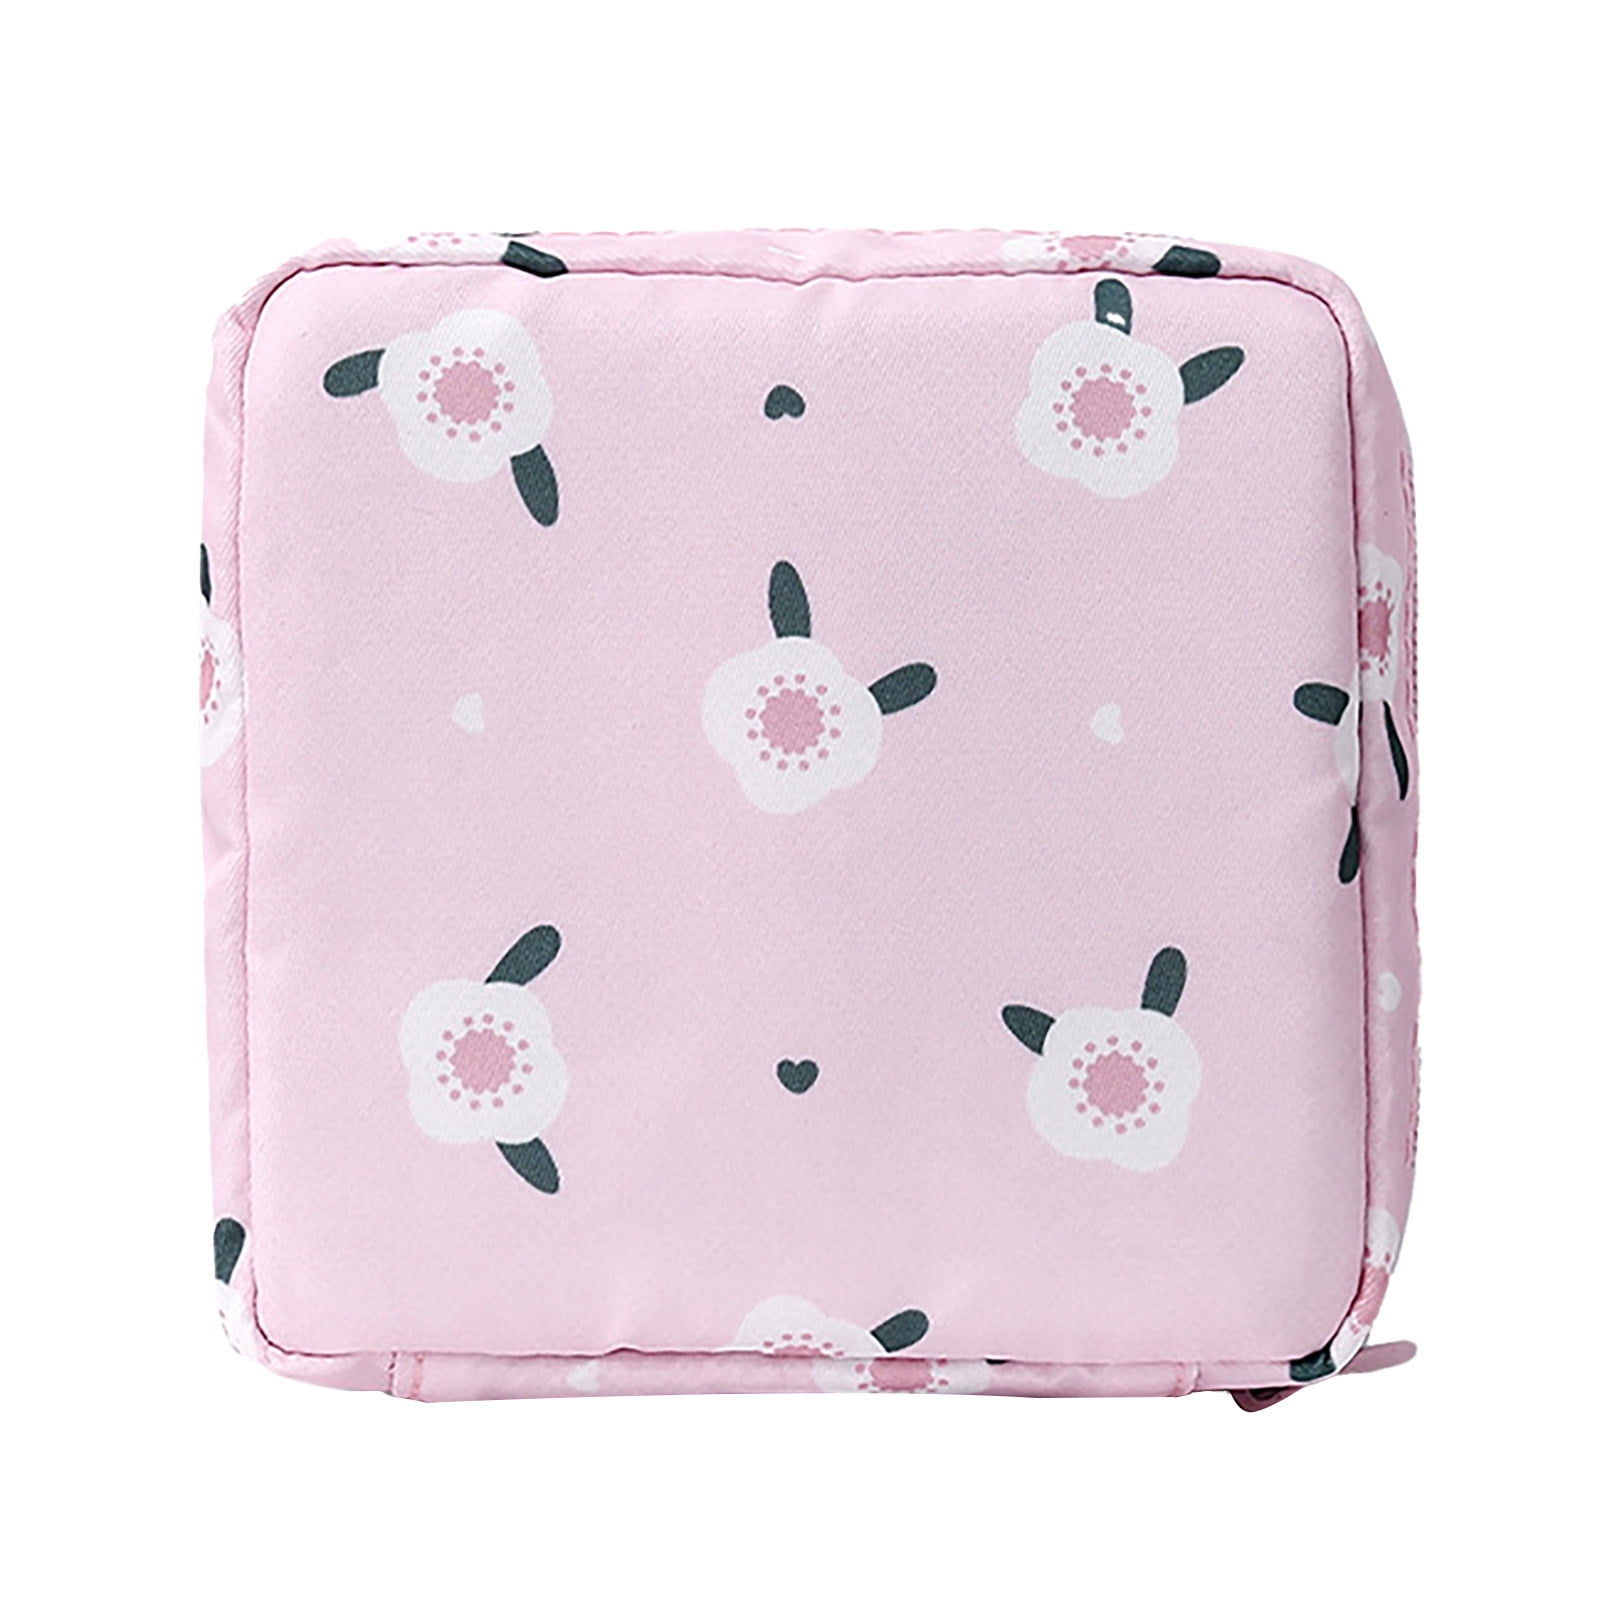 Hesroicy Sanitary Pad Pouch with Portable, Large Capacity, Lovely and  Adorable Cartoon Pattern, Zipper Closure, Waterproof Polyester Material,  Ideal for Students and as Sanitary Towel Bag - Walmart.com